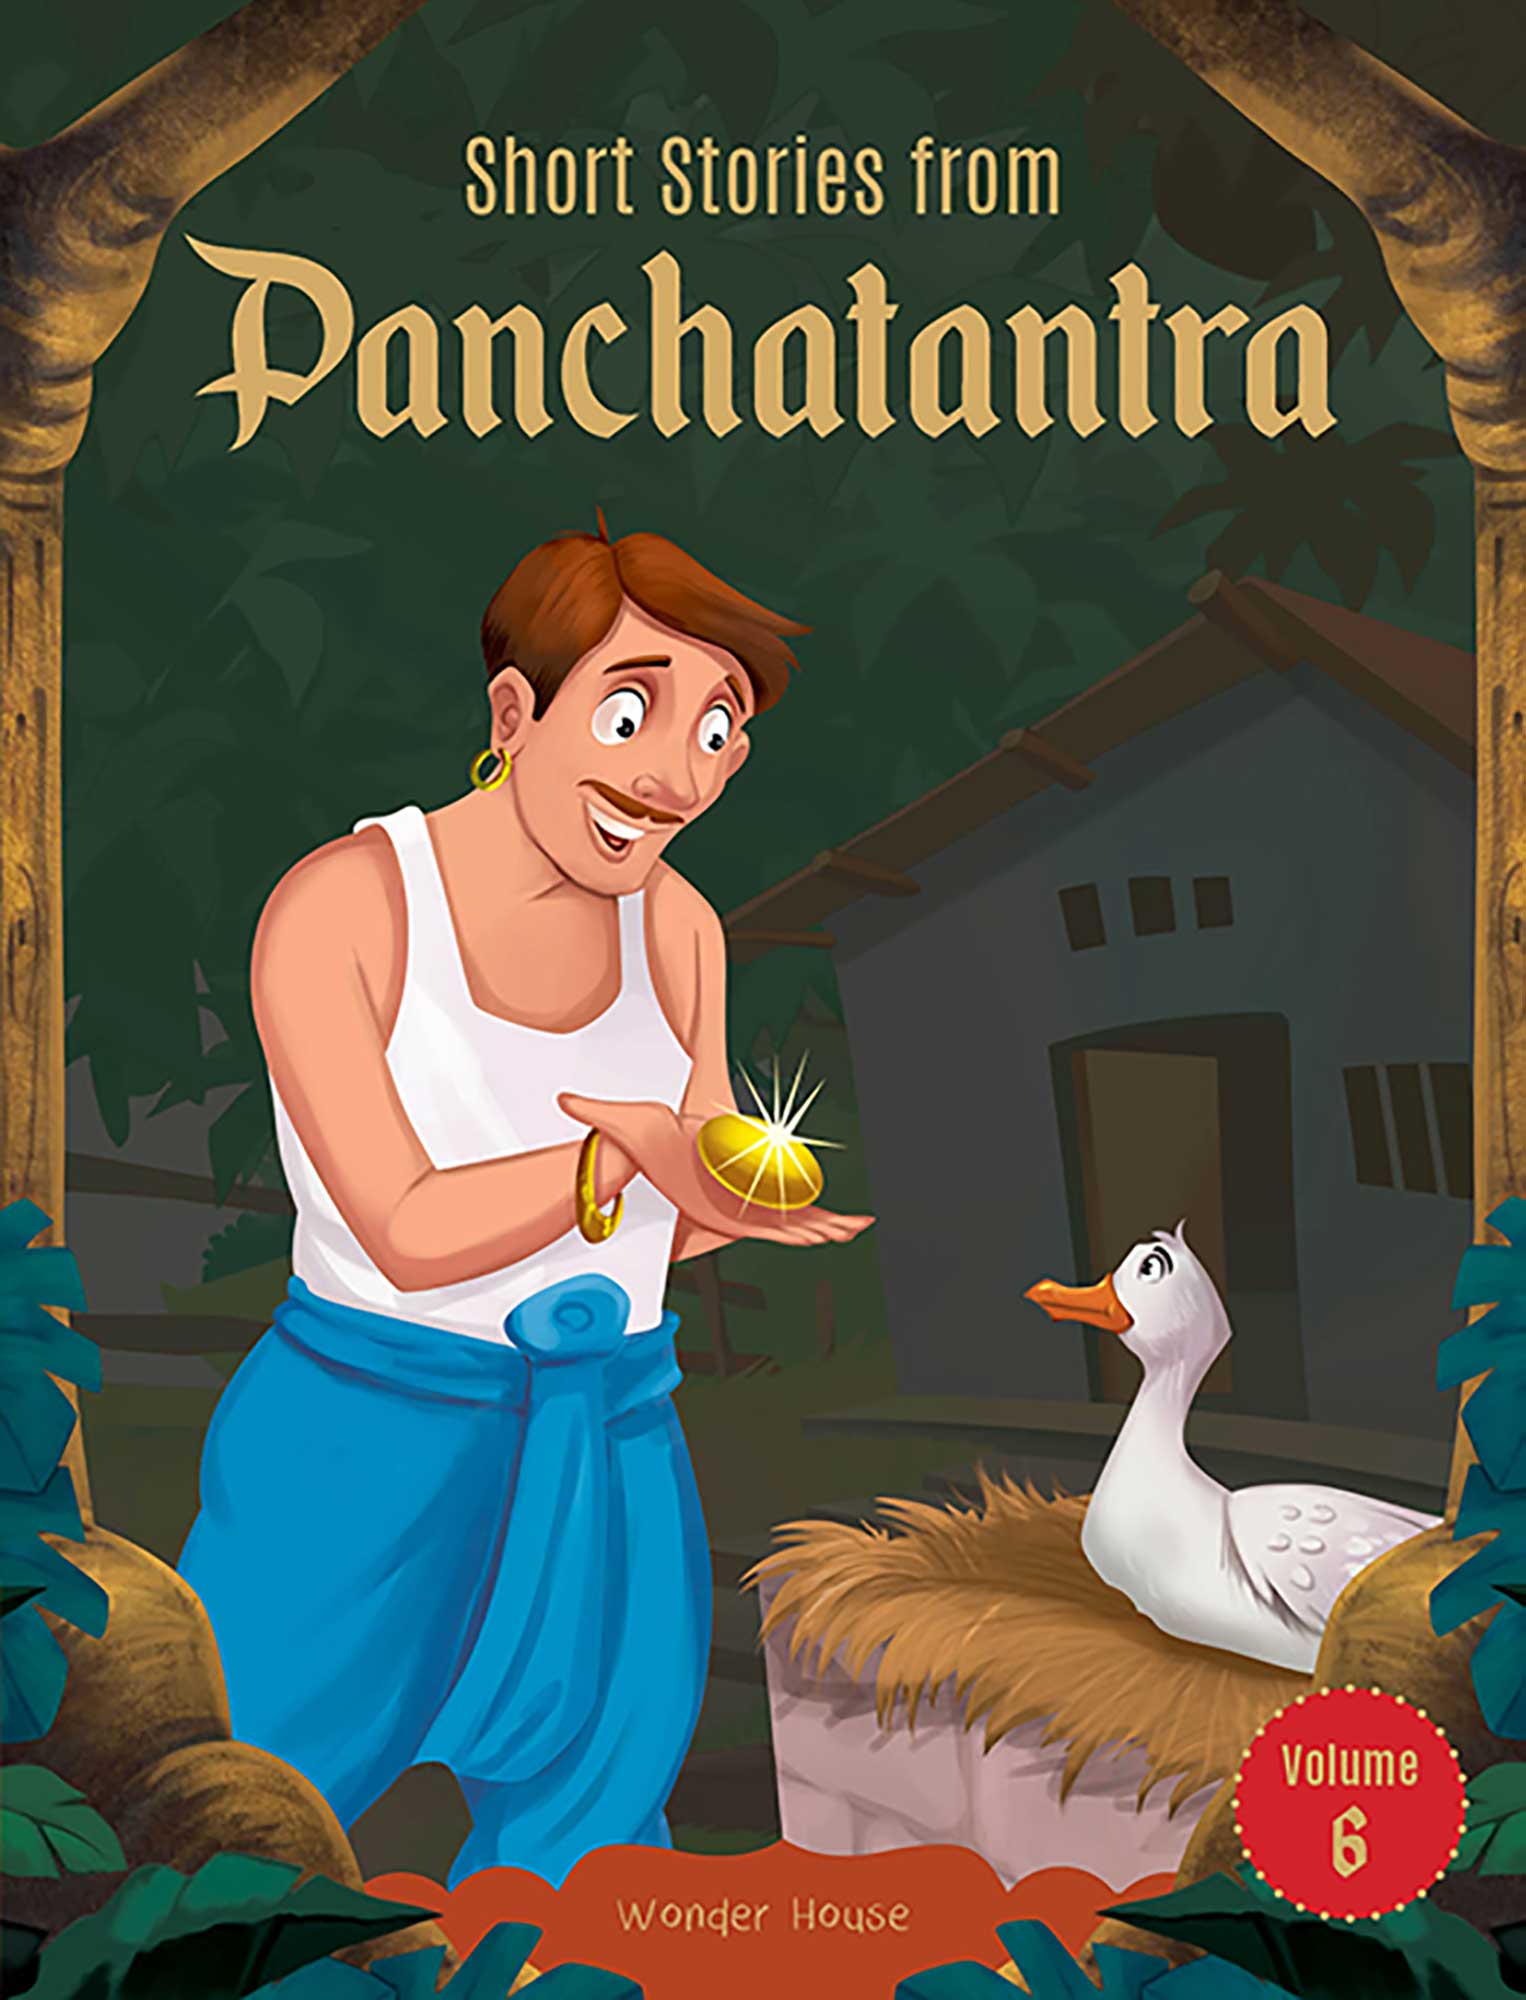 Short Stories From Panchatantra - Volume 6: Abridged Illustrated Stories For Children (With Morals)